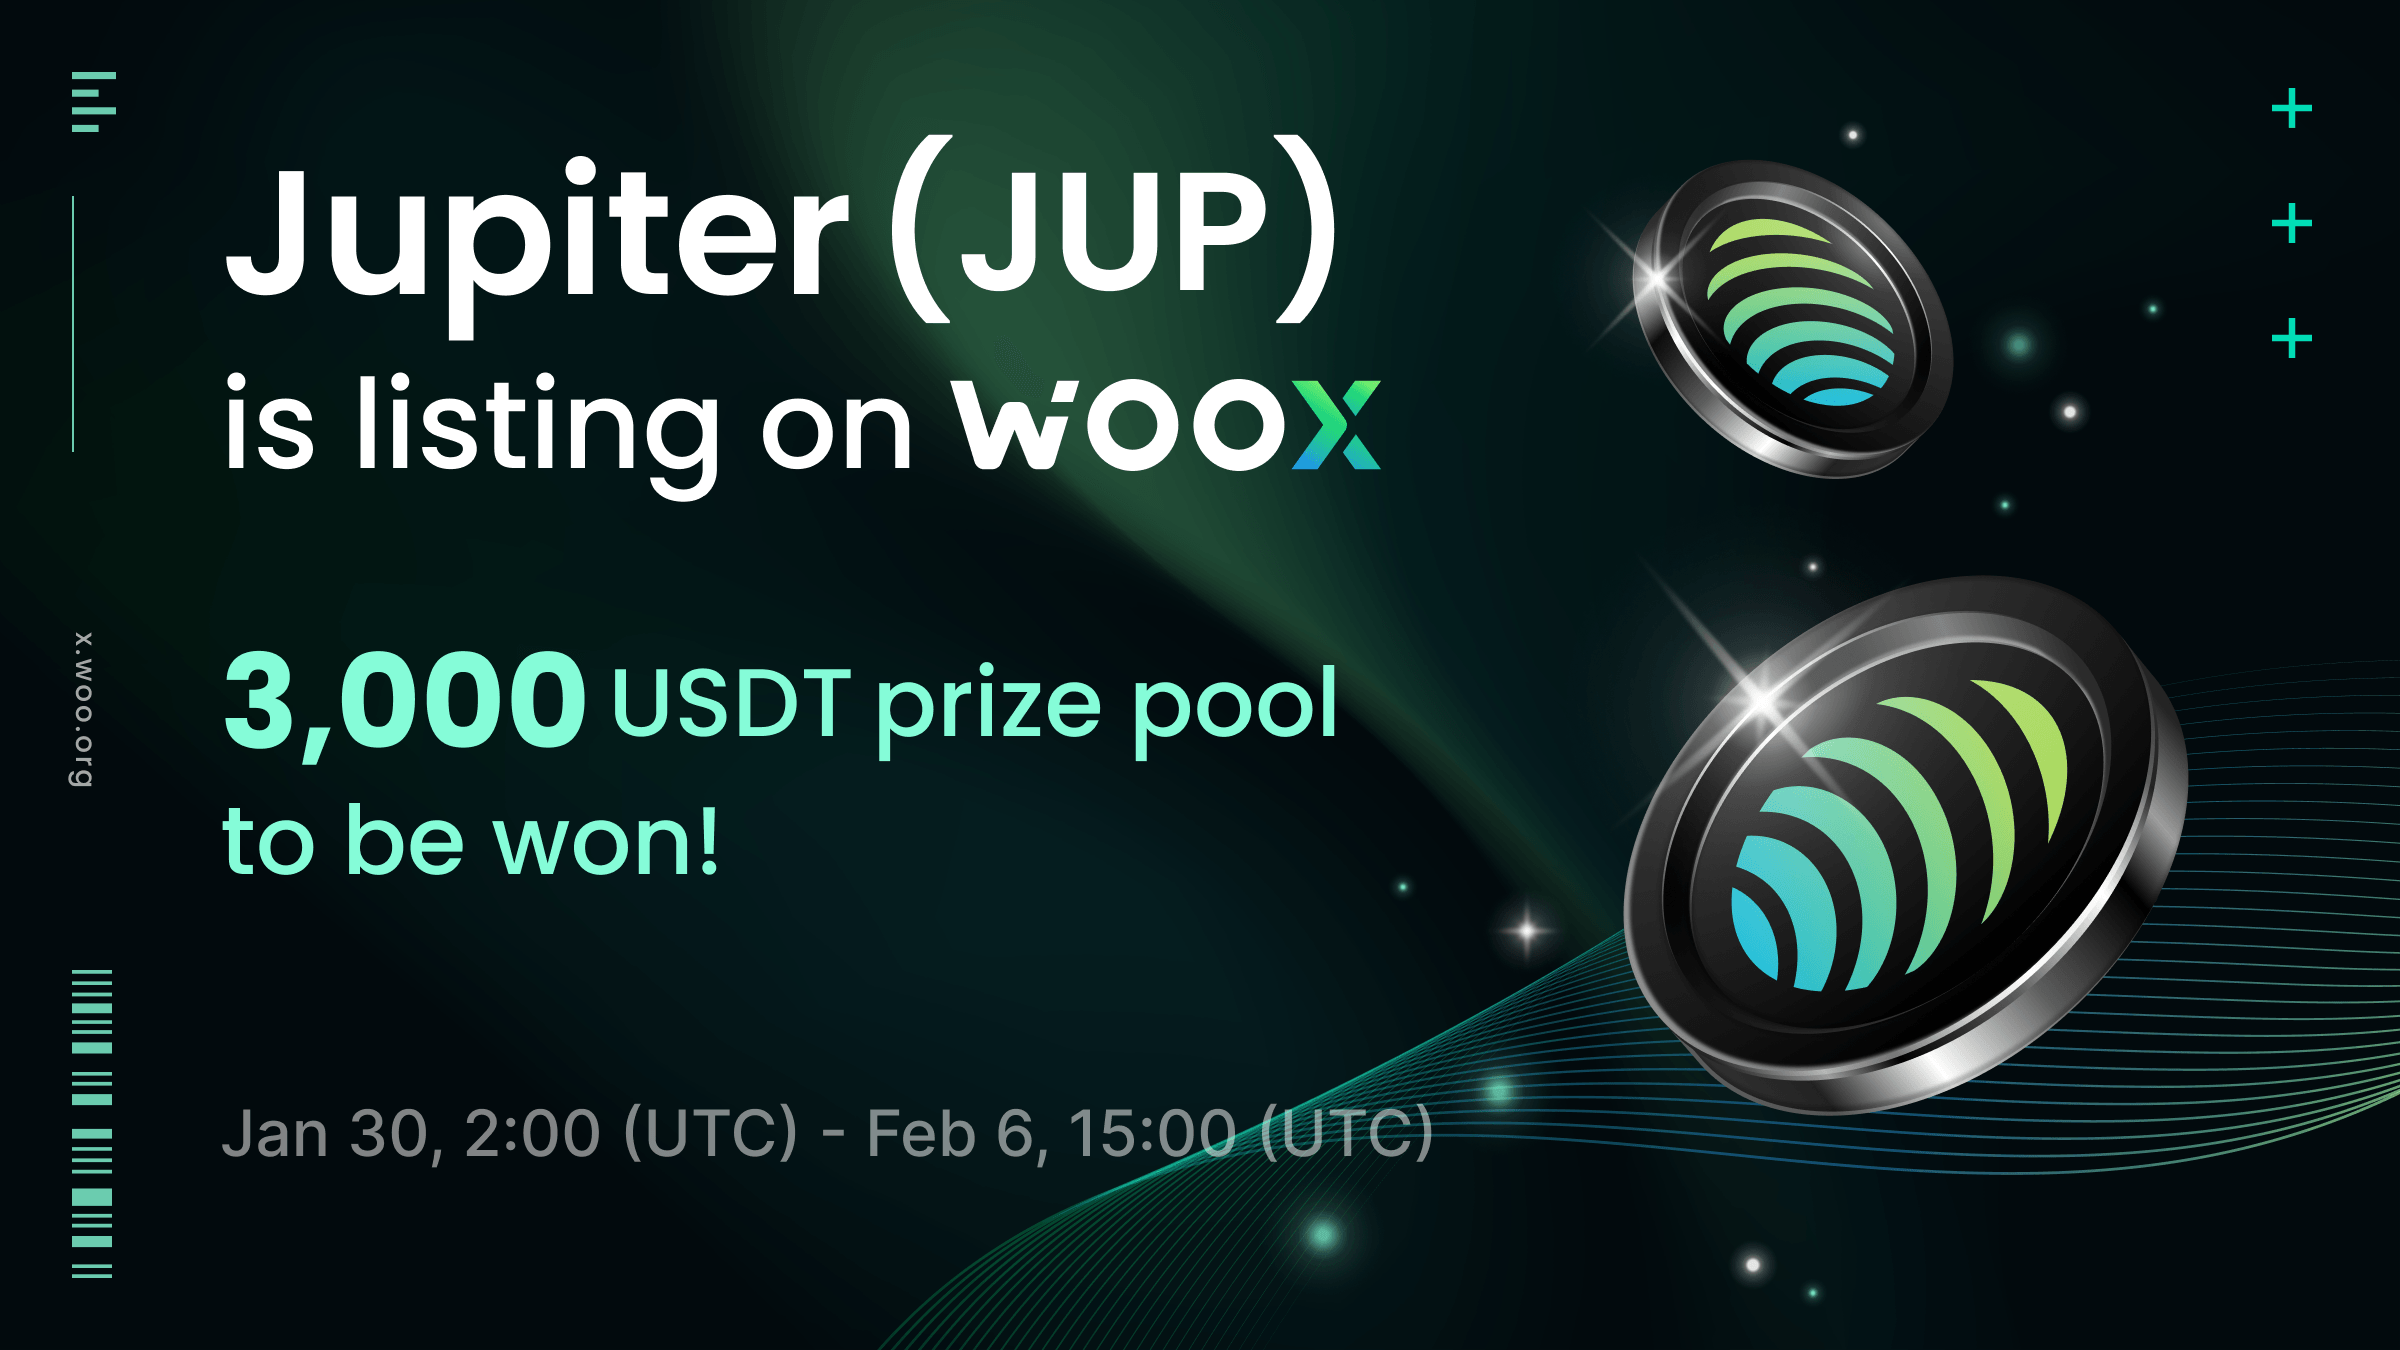 New Listing: Jupiter (JUP) on WOO X - Trade and share a 3,000 USDT prize pool!